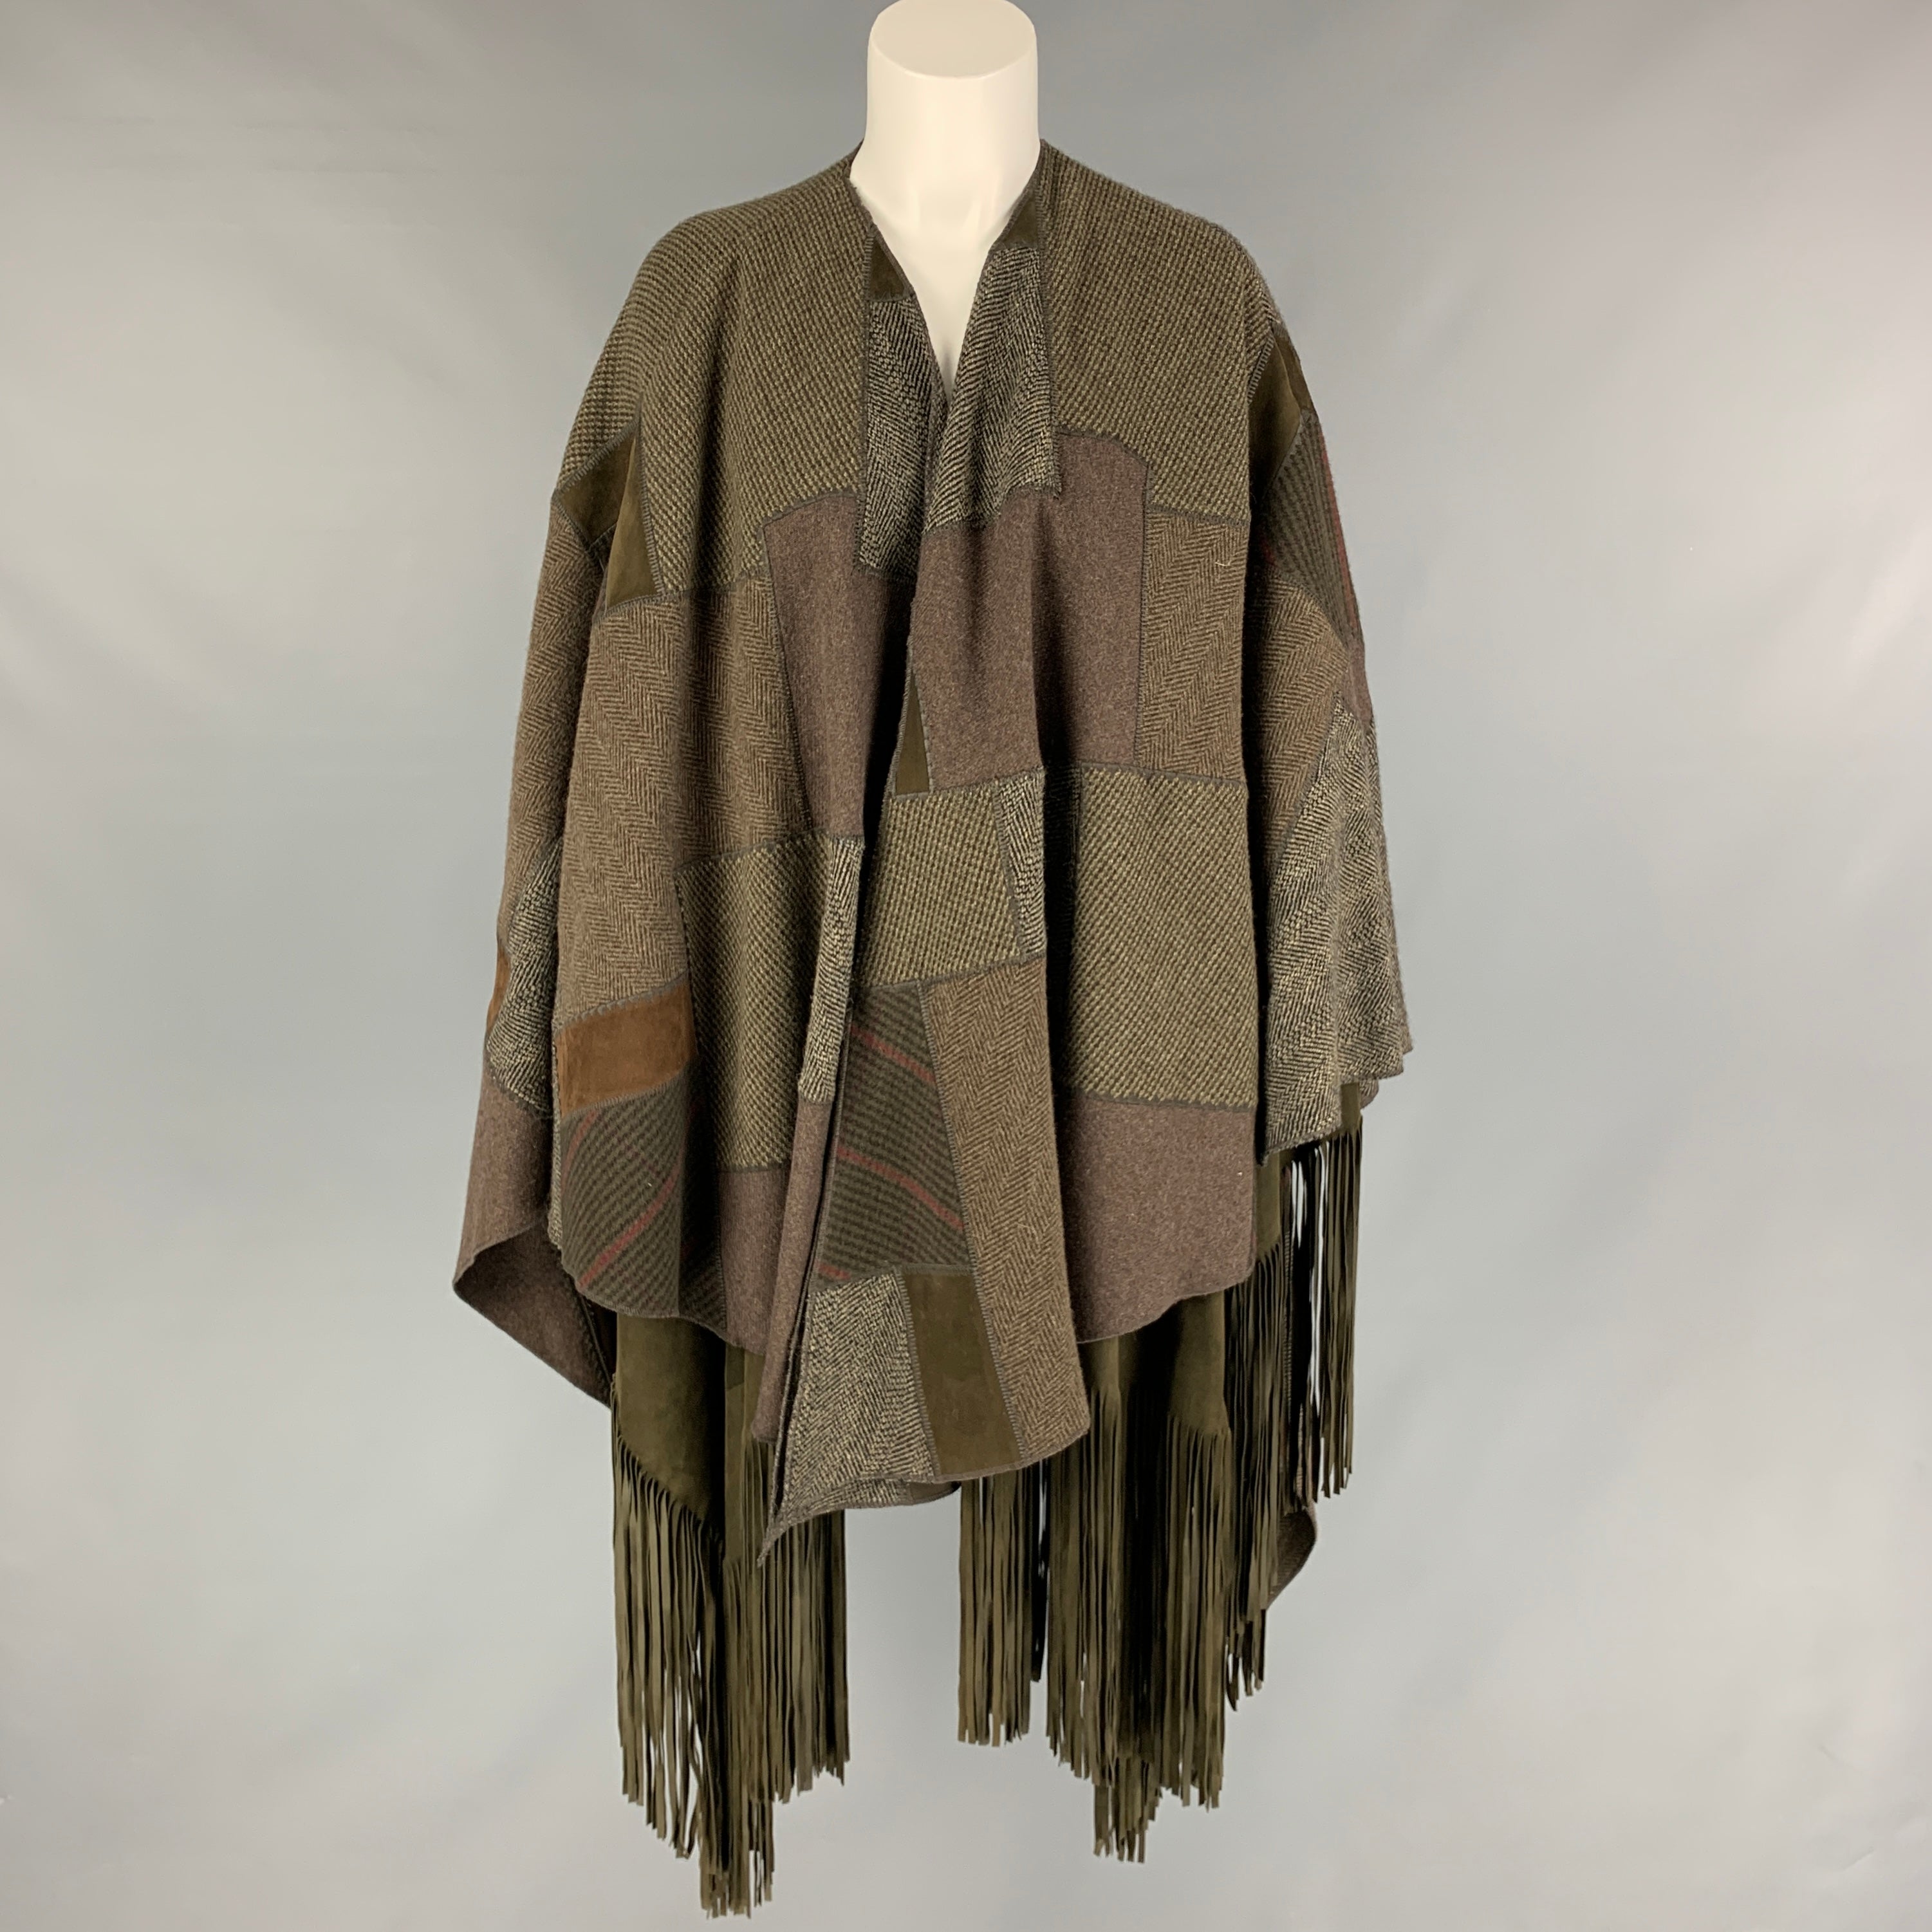 ETRO fringed patchwork scarf - Brown